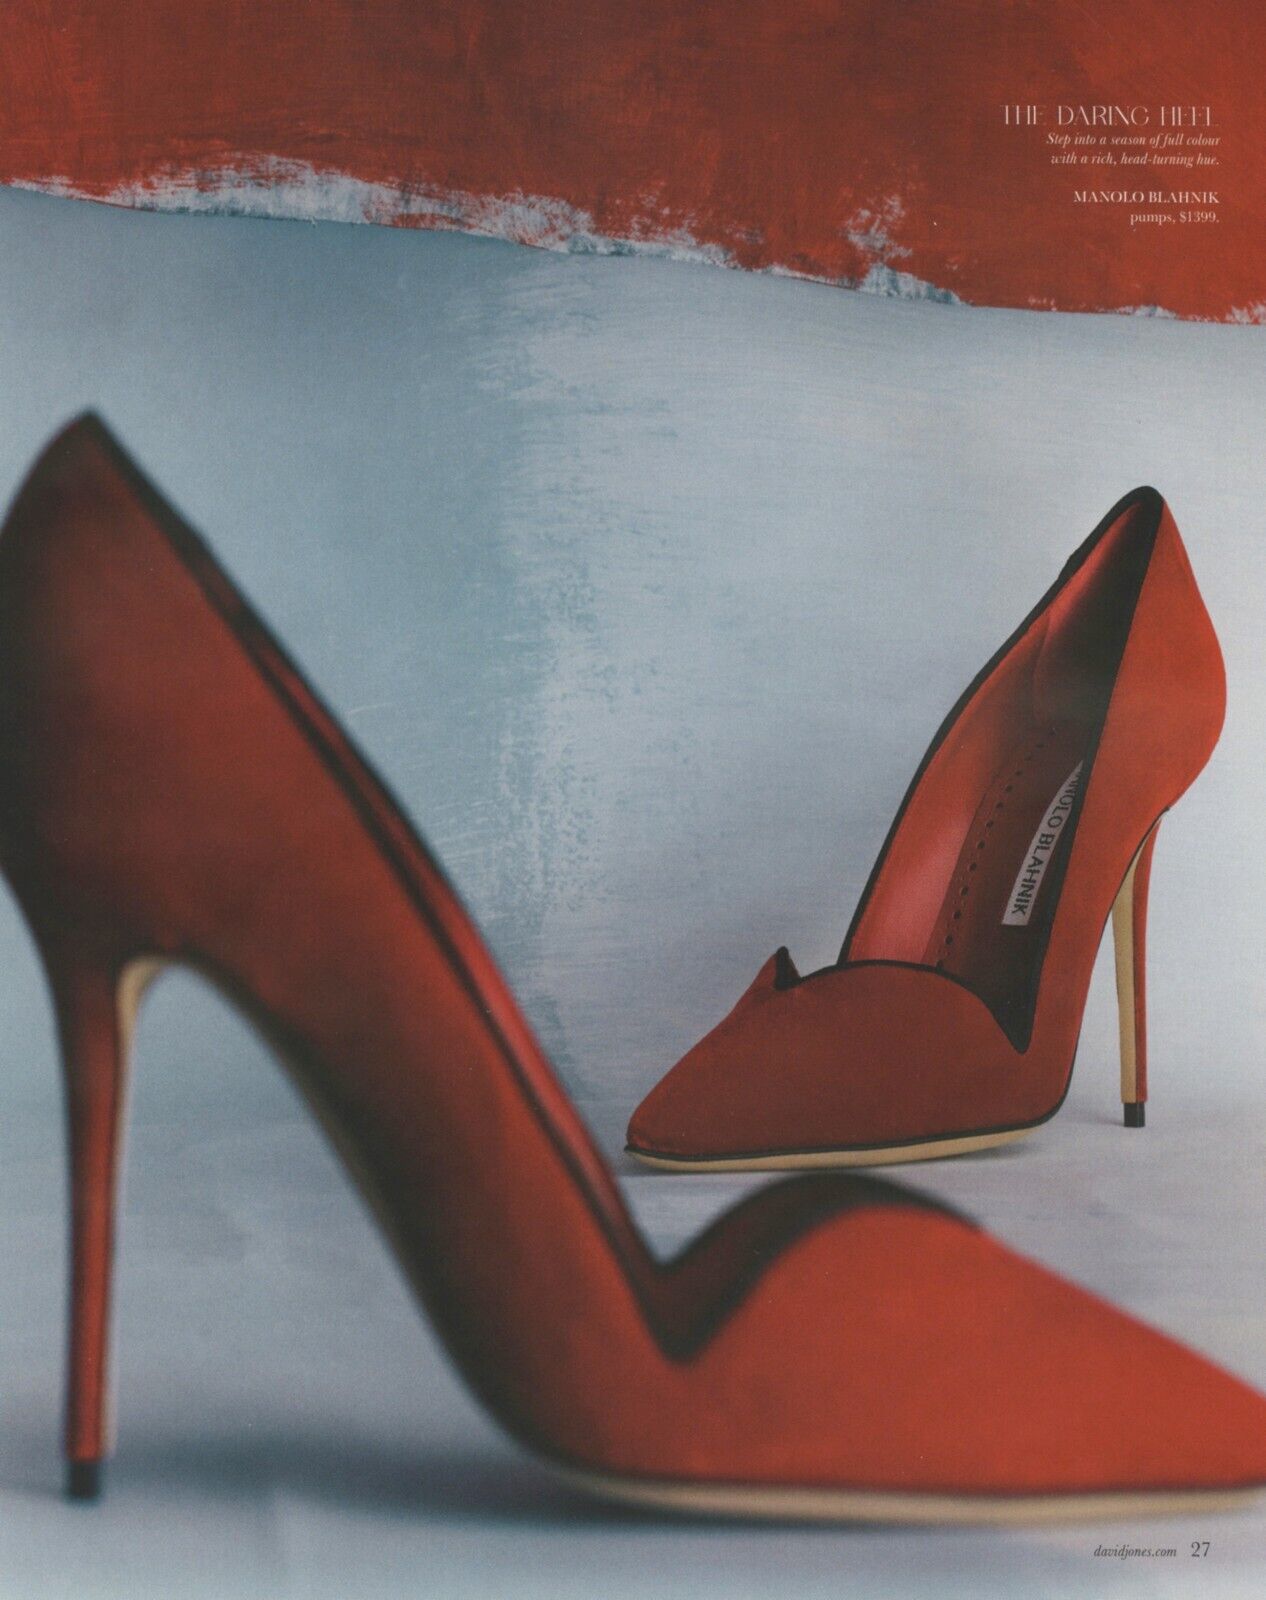 MANOLO BLAHNIK - Sexy Red Pumps Luxury Shoes -  Magazine 1 Page PRINT AD